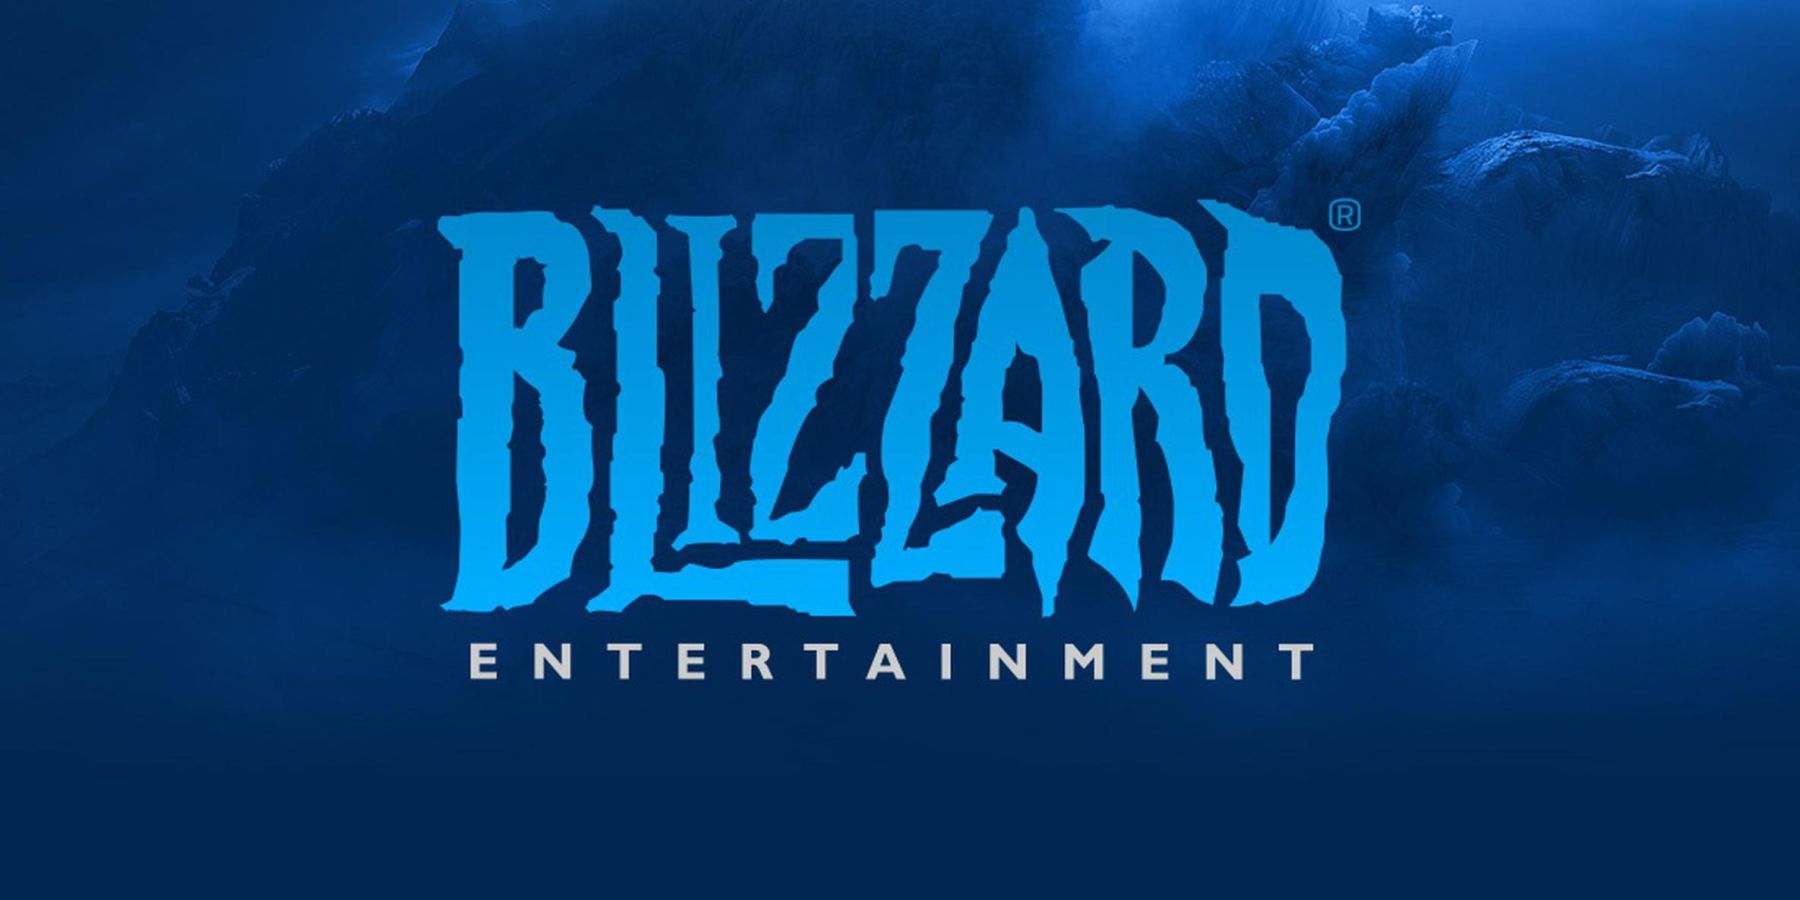 The logo for Blizzard Entertainment set against a blue graphic background.